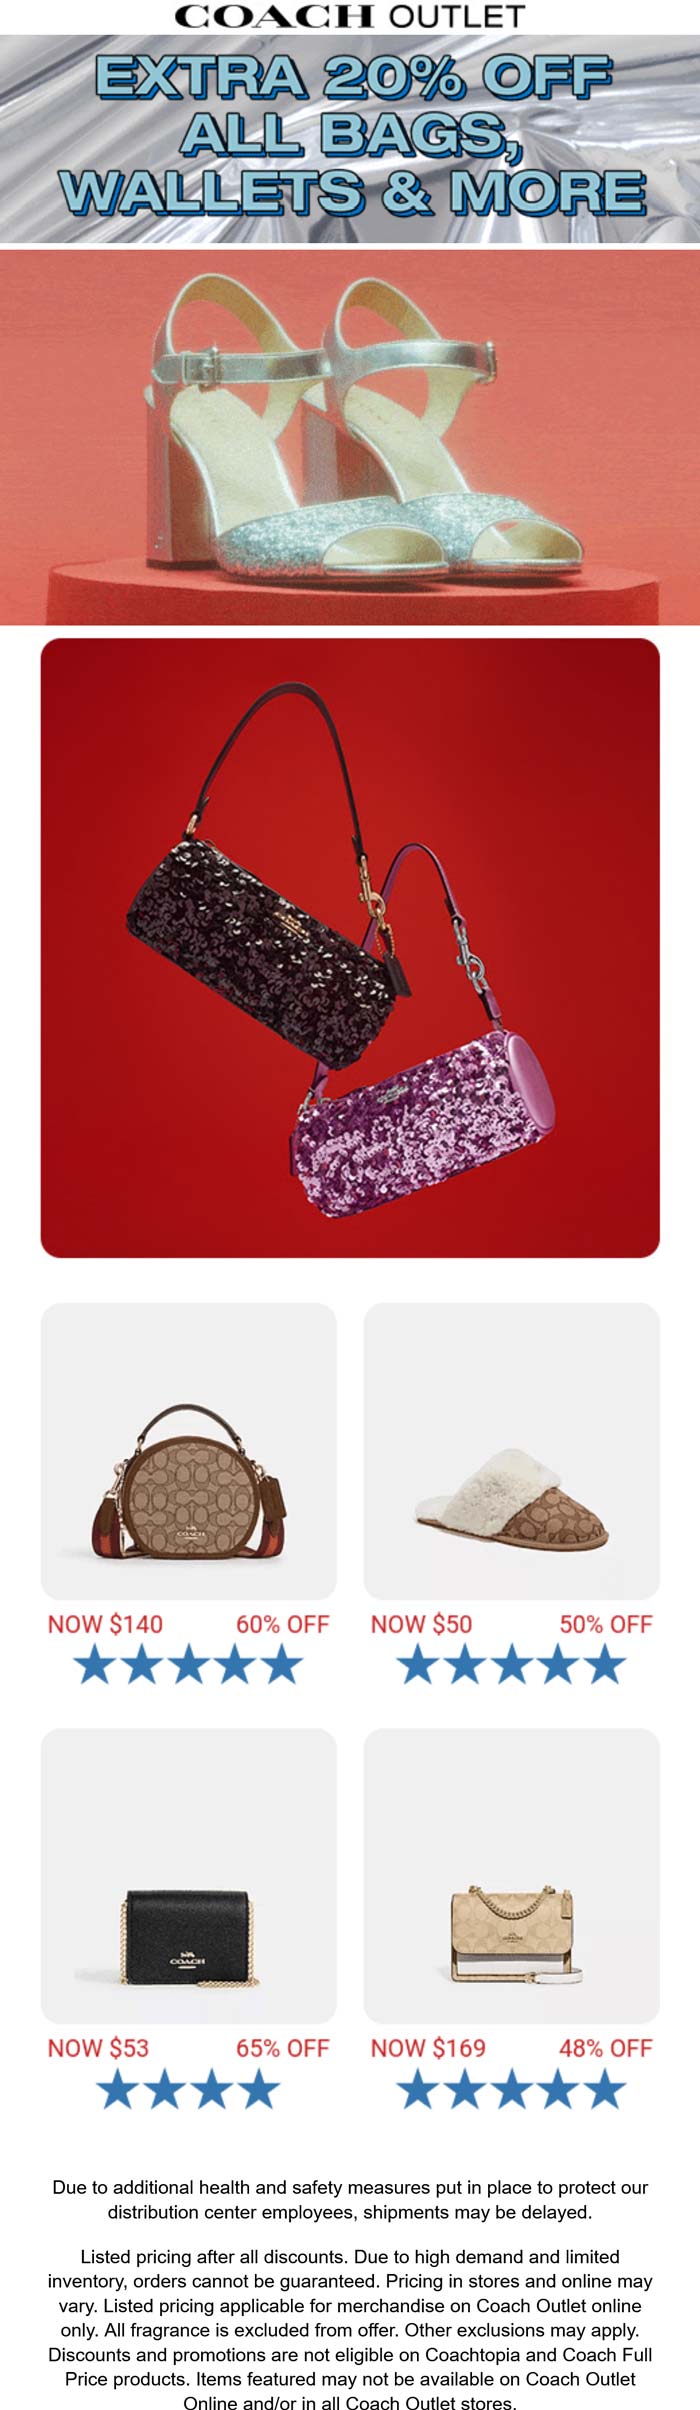 Extra 20% off all bags & wallets at Coach Outlet #coachoutlet